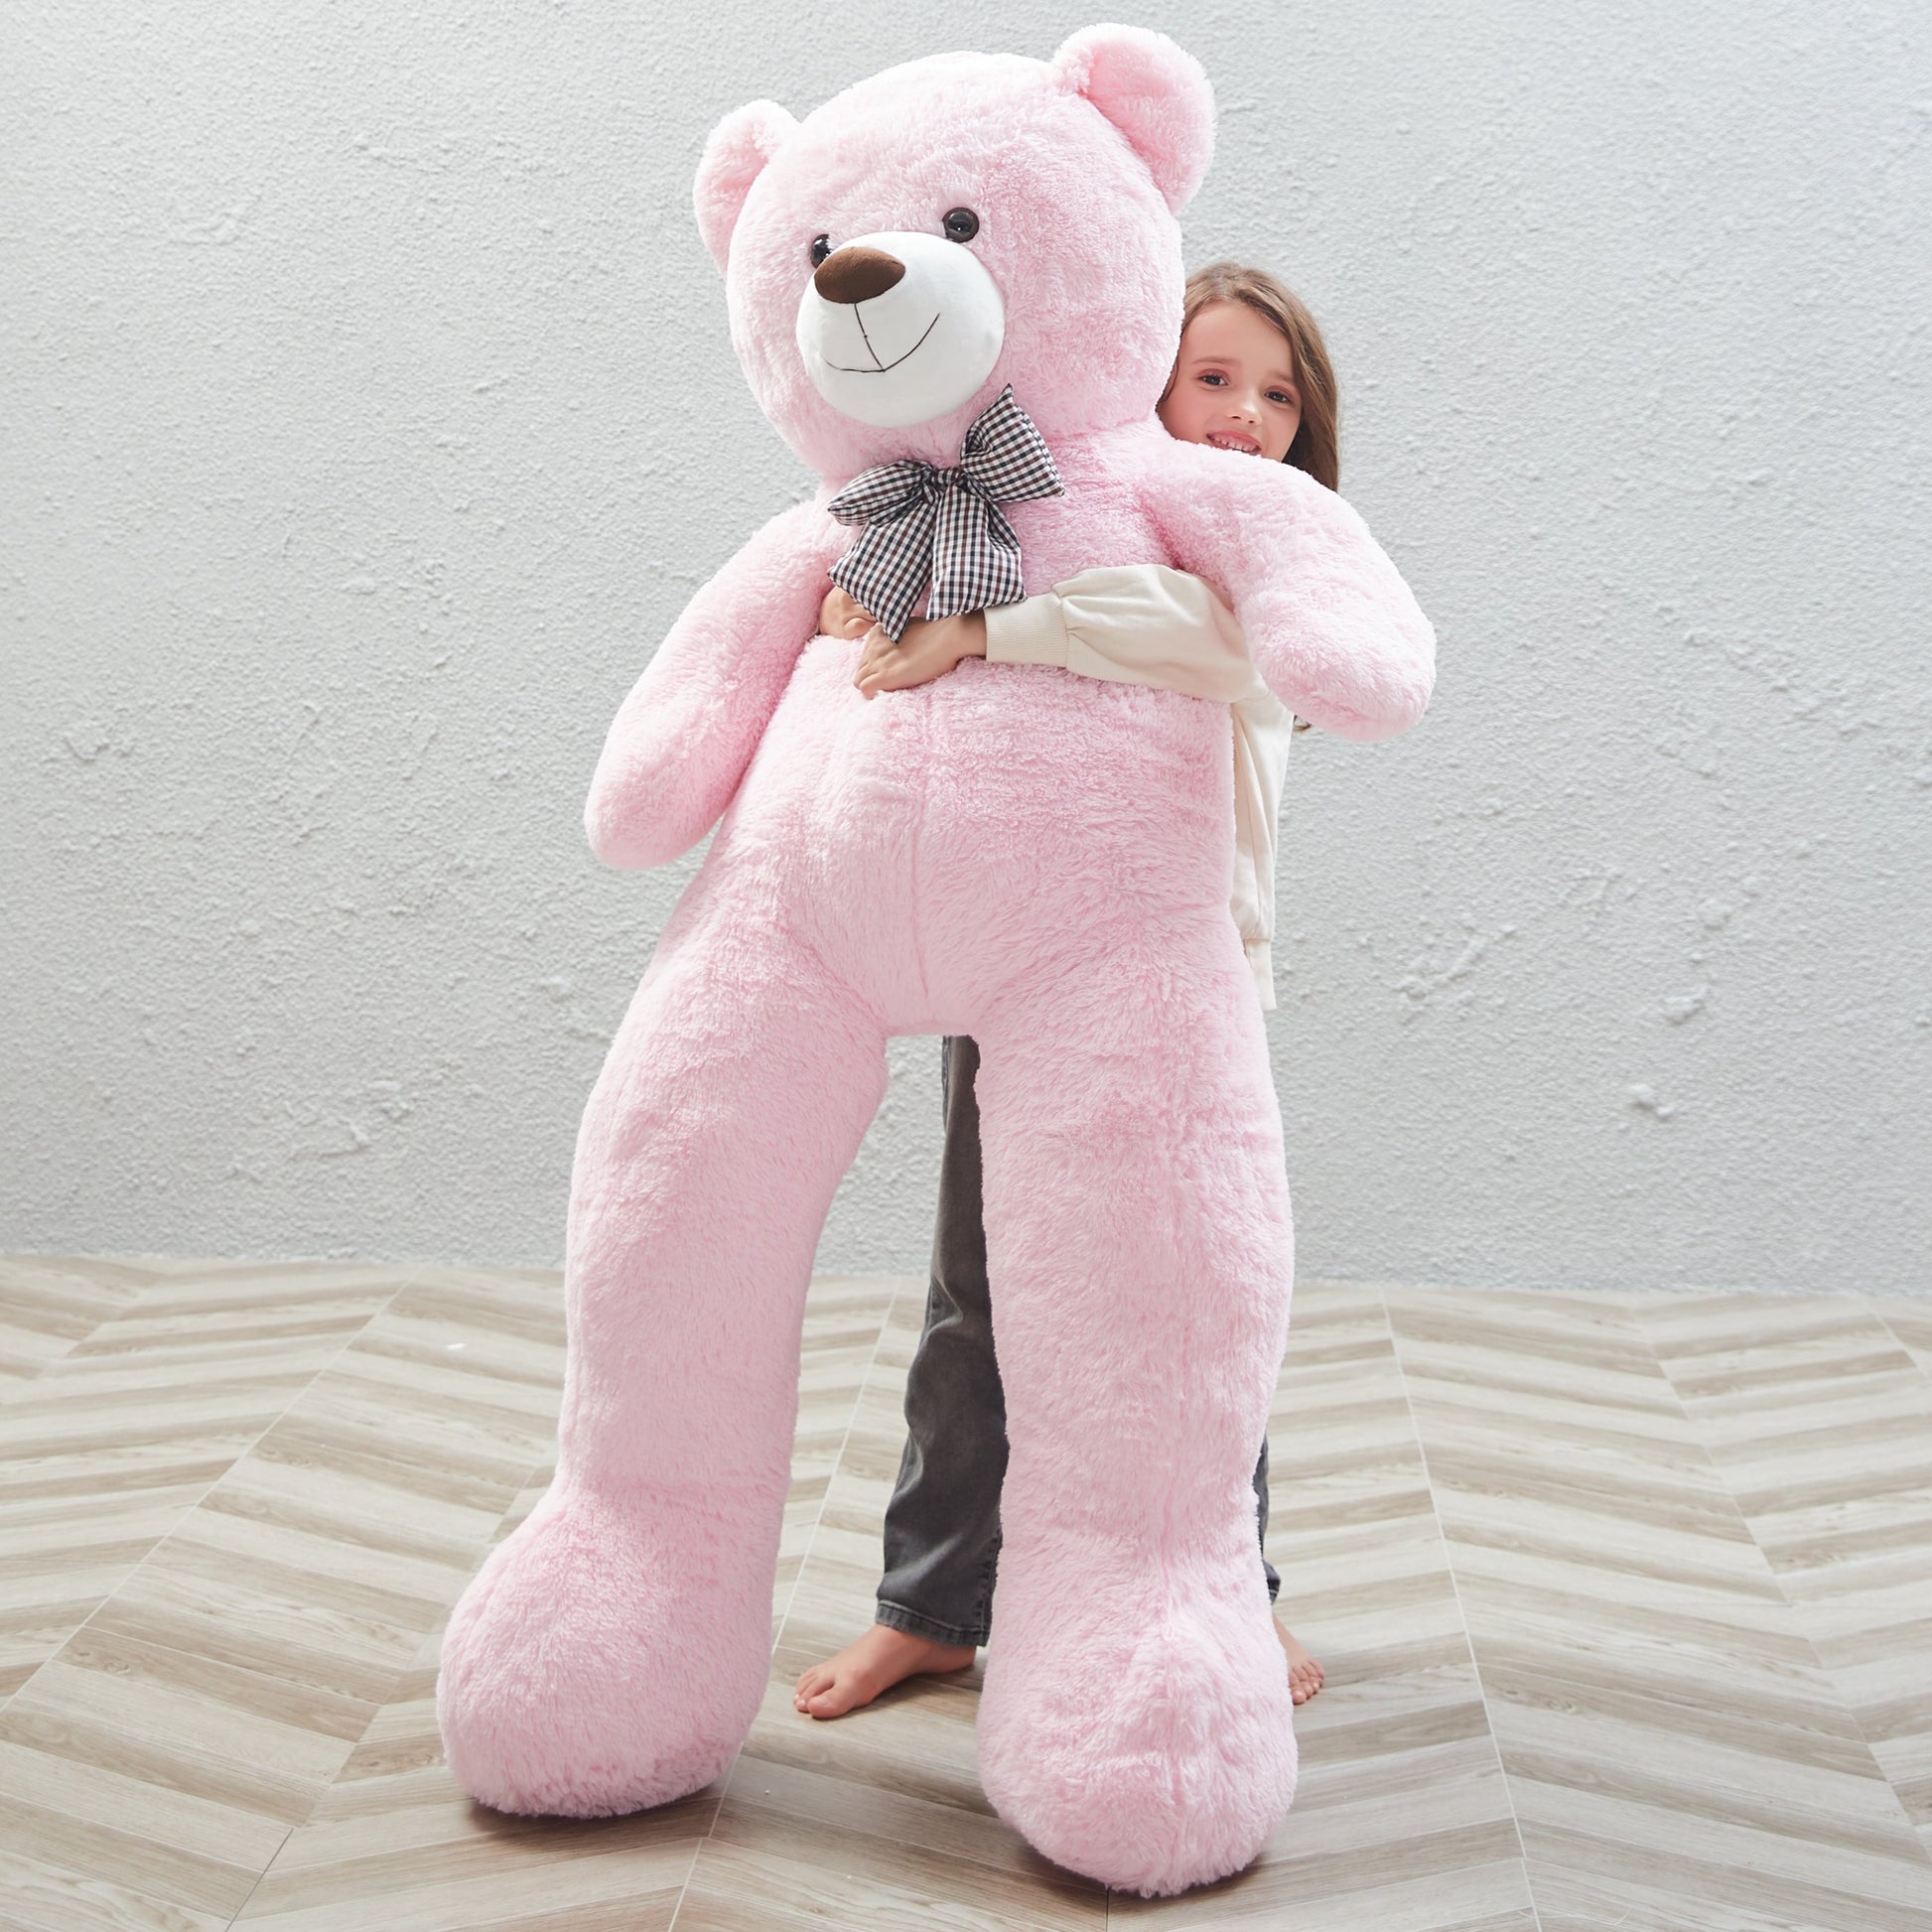 Giant Teddy Bear Stuffed Animal Toy, Pink, 39/47/55/59 Inches